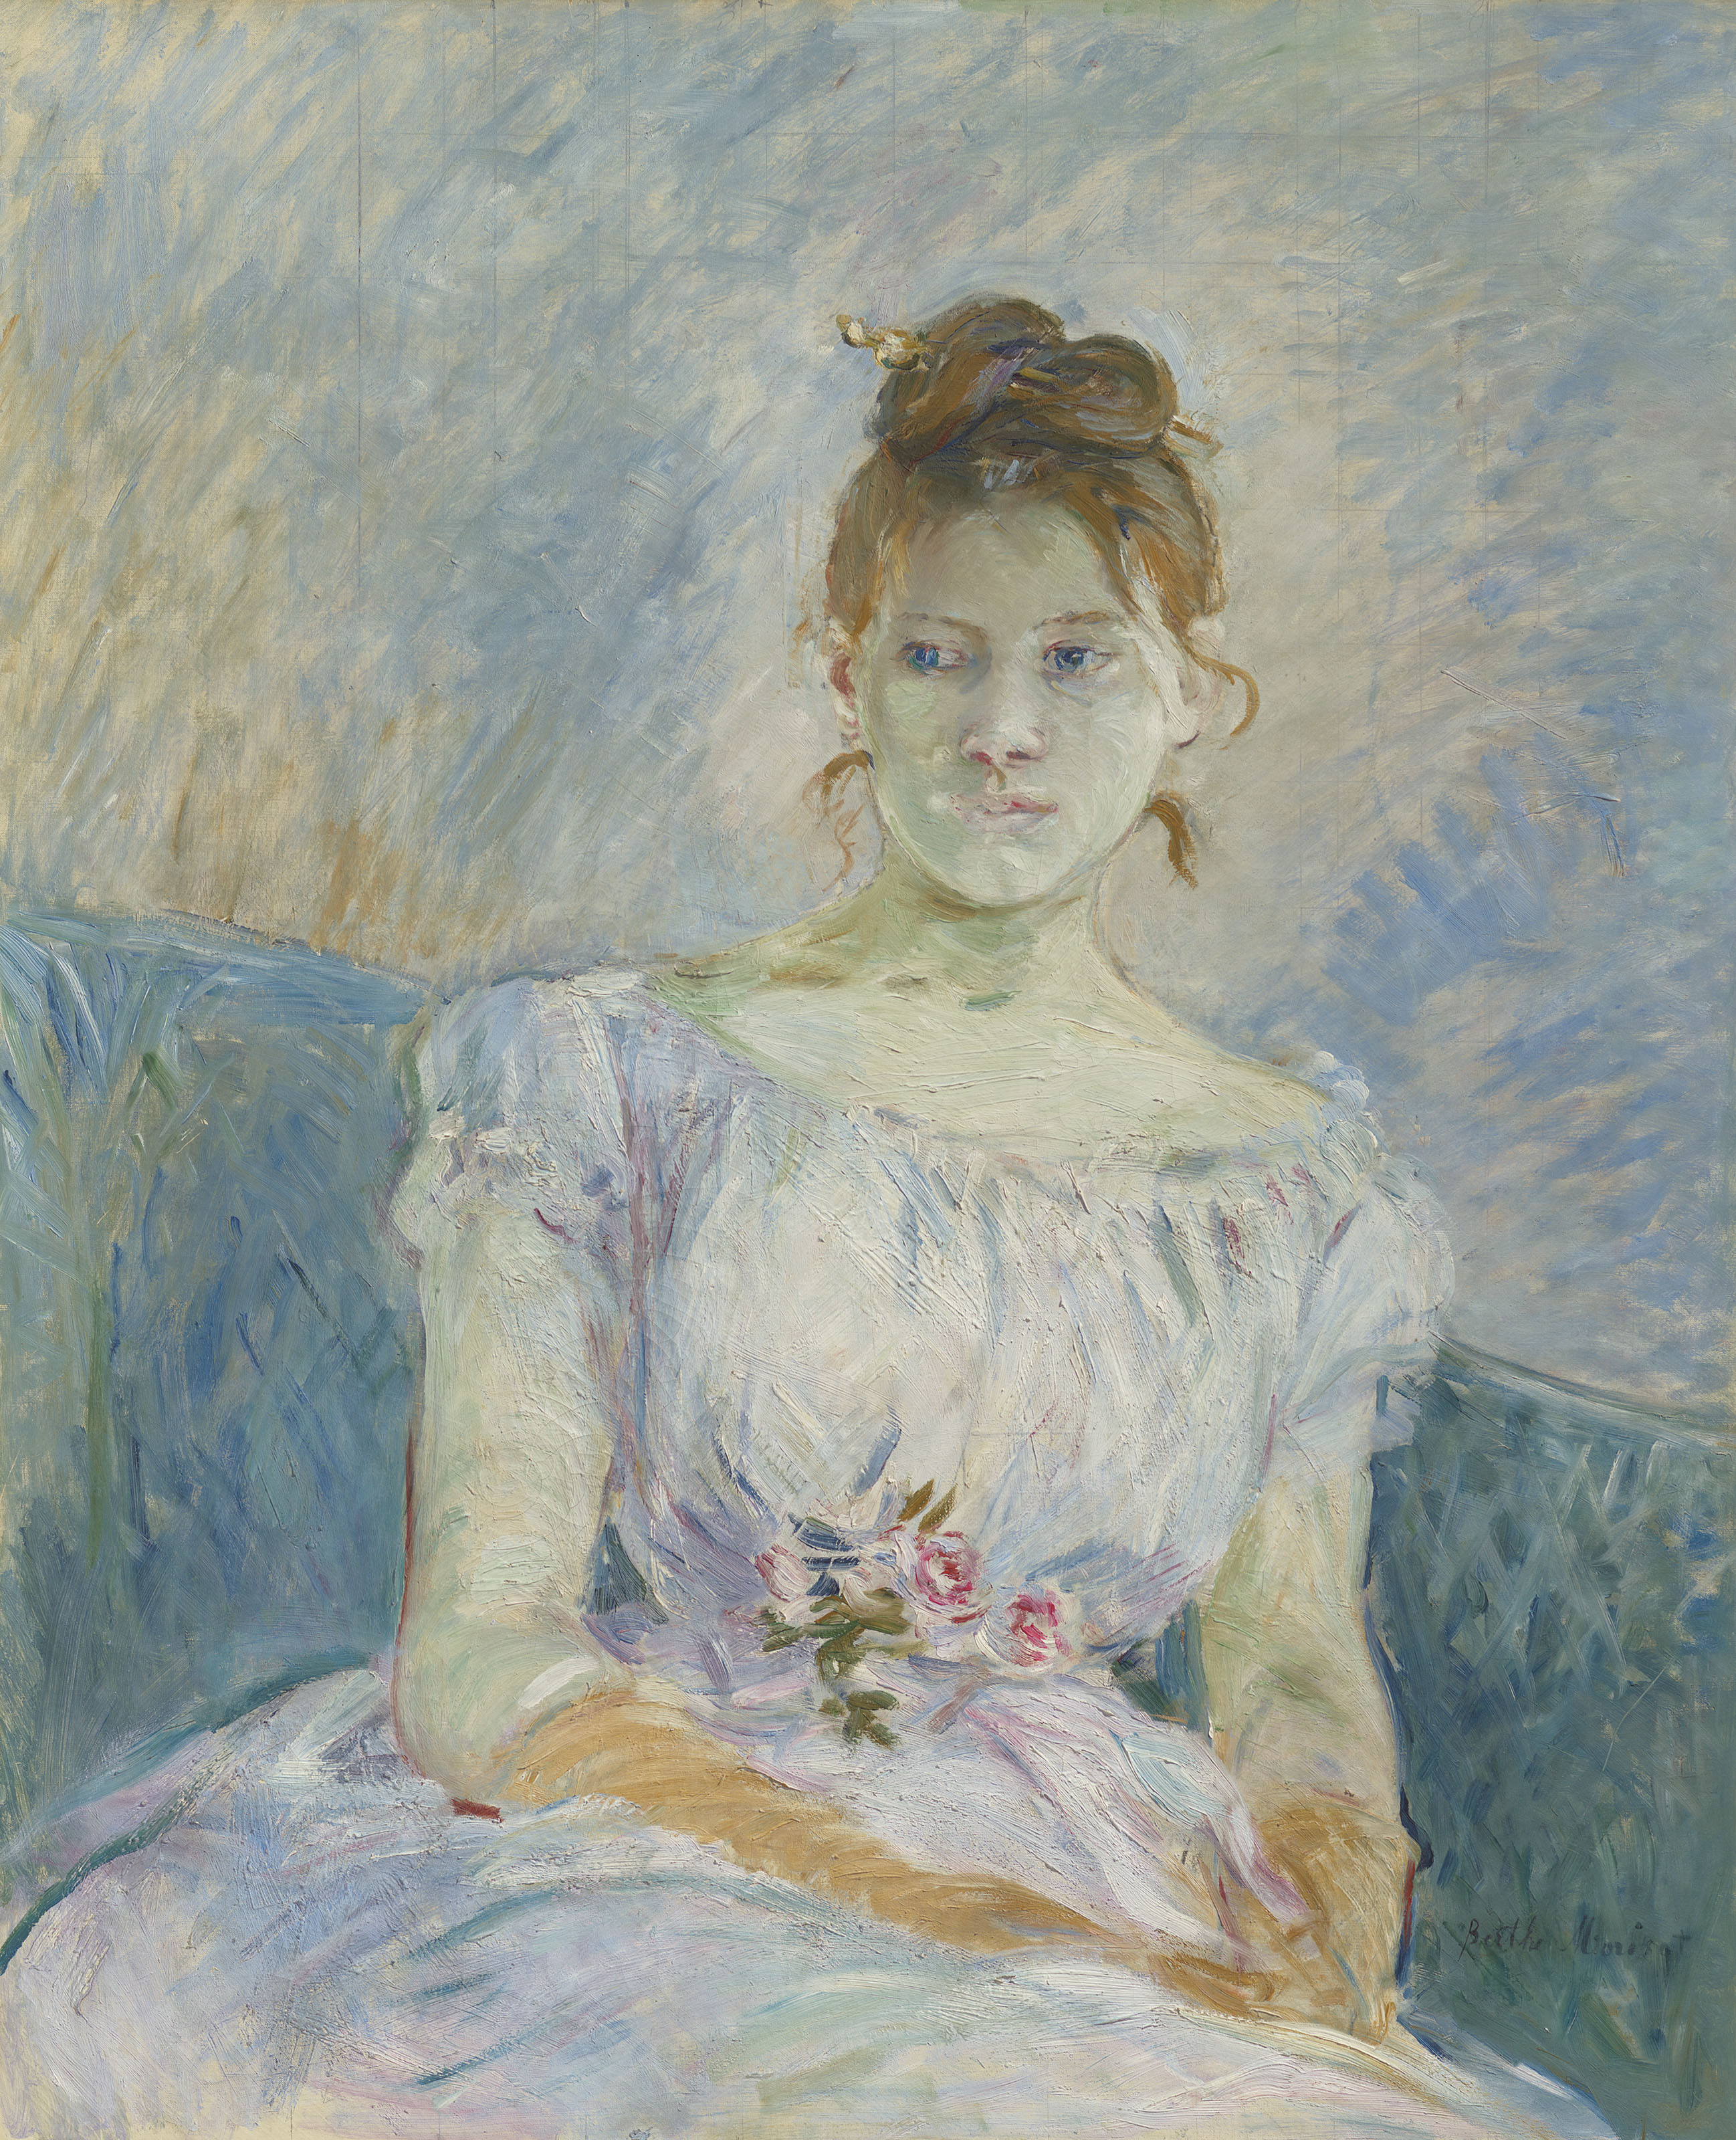 Paule Gobillard in the Ball Dress by Berthe Morisot - 1887 private collection